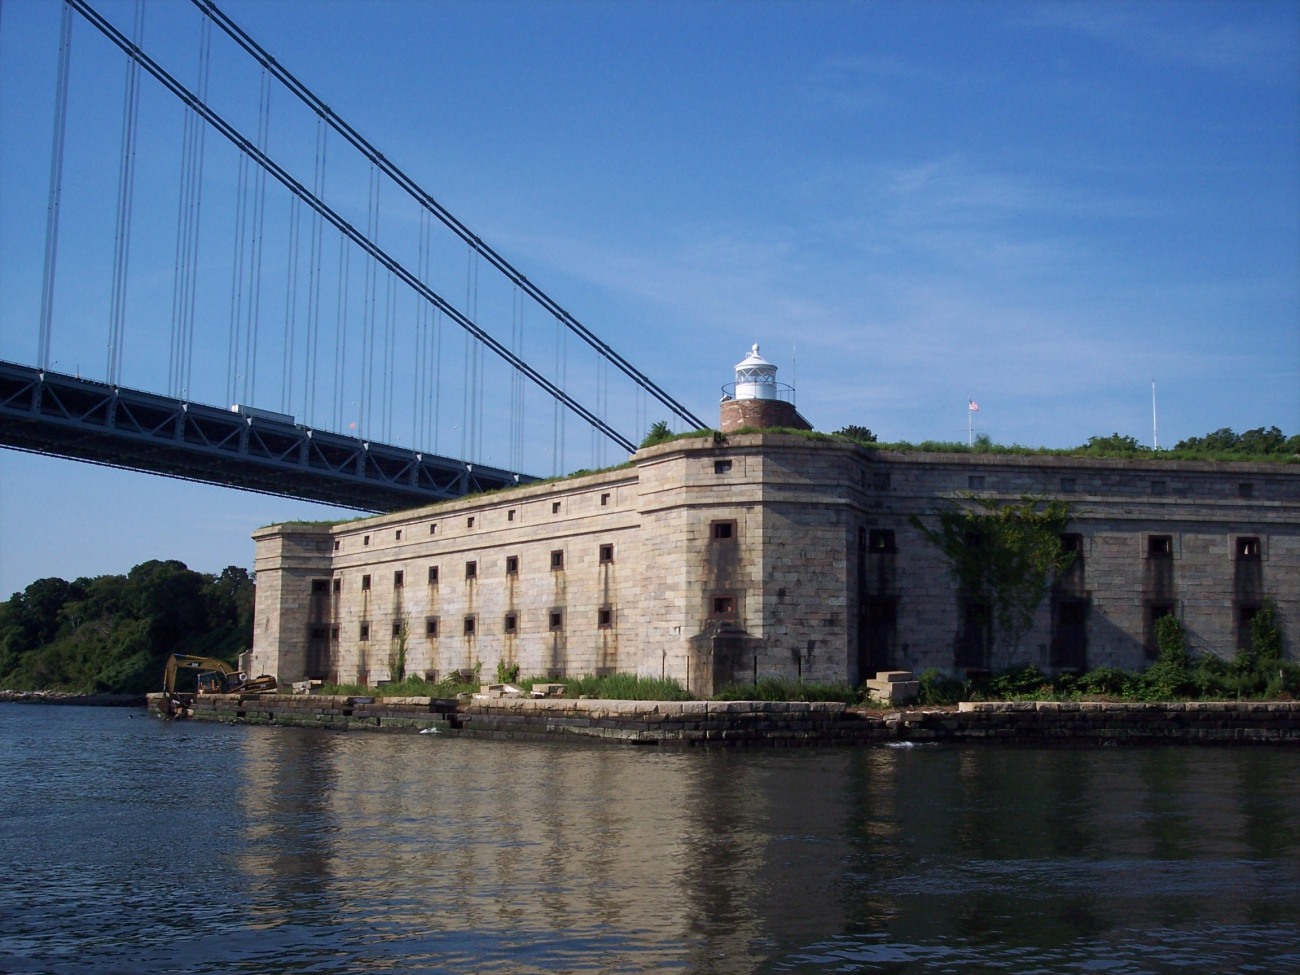 Fort Wadsworth and the Fort Wadsworth Lighthouse with the westernterminus of the Verrazano-Narrows Bridge in the background